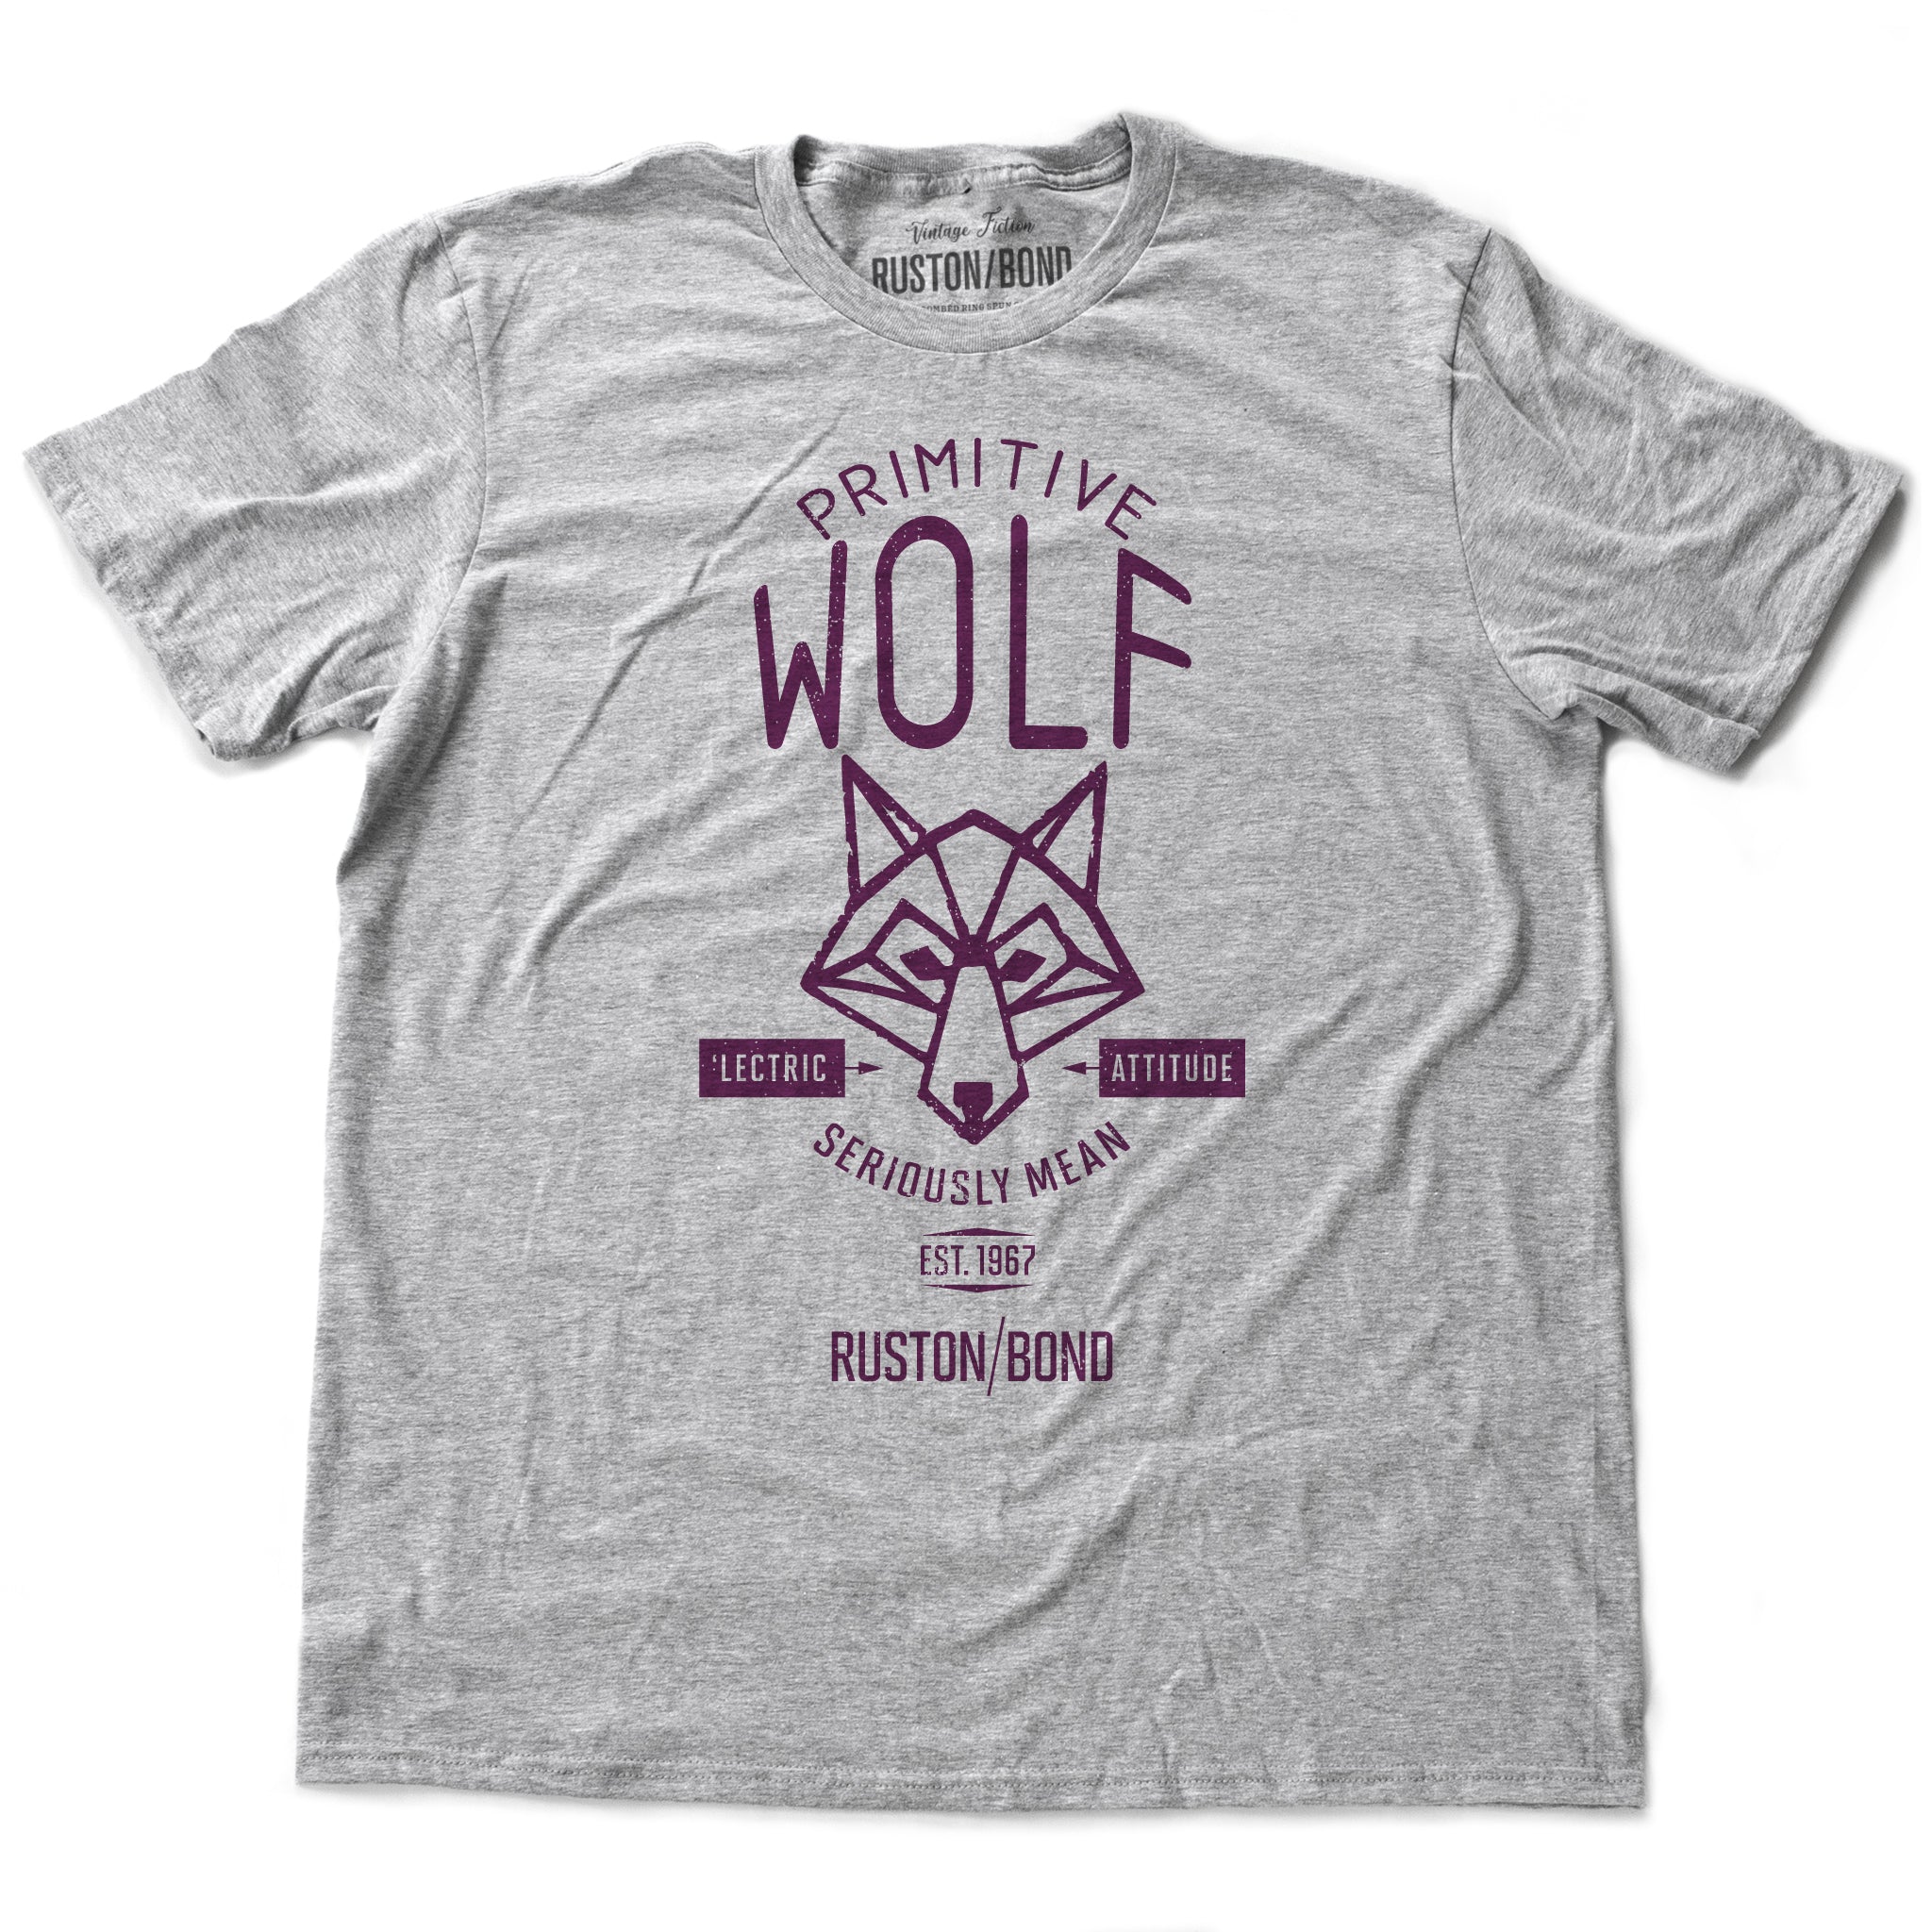 A fashionable, retro t-shirt in Classic Athletic Heather Gray, featuring a graphic of a “Primitive Wolf” and the text “Seriously mean” and “electric attitude.” By fashion brand Ruston/Bond, from wolfsaint.net